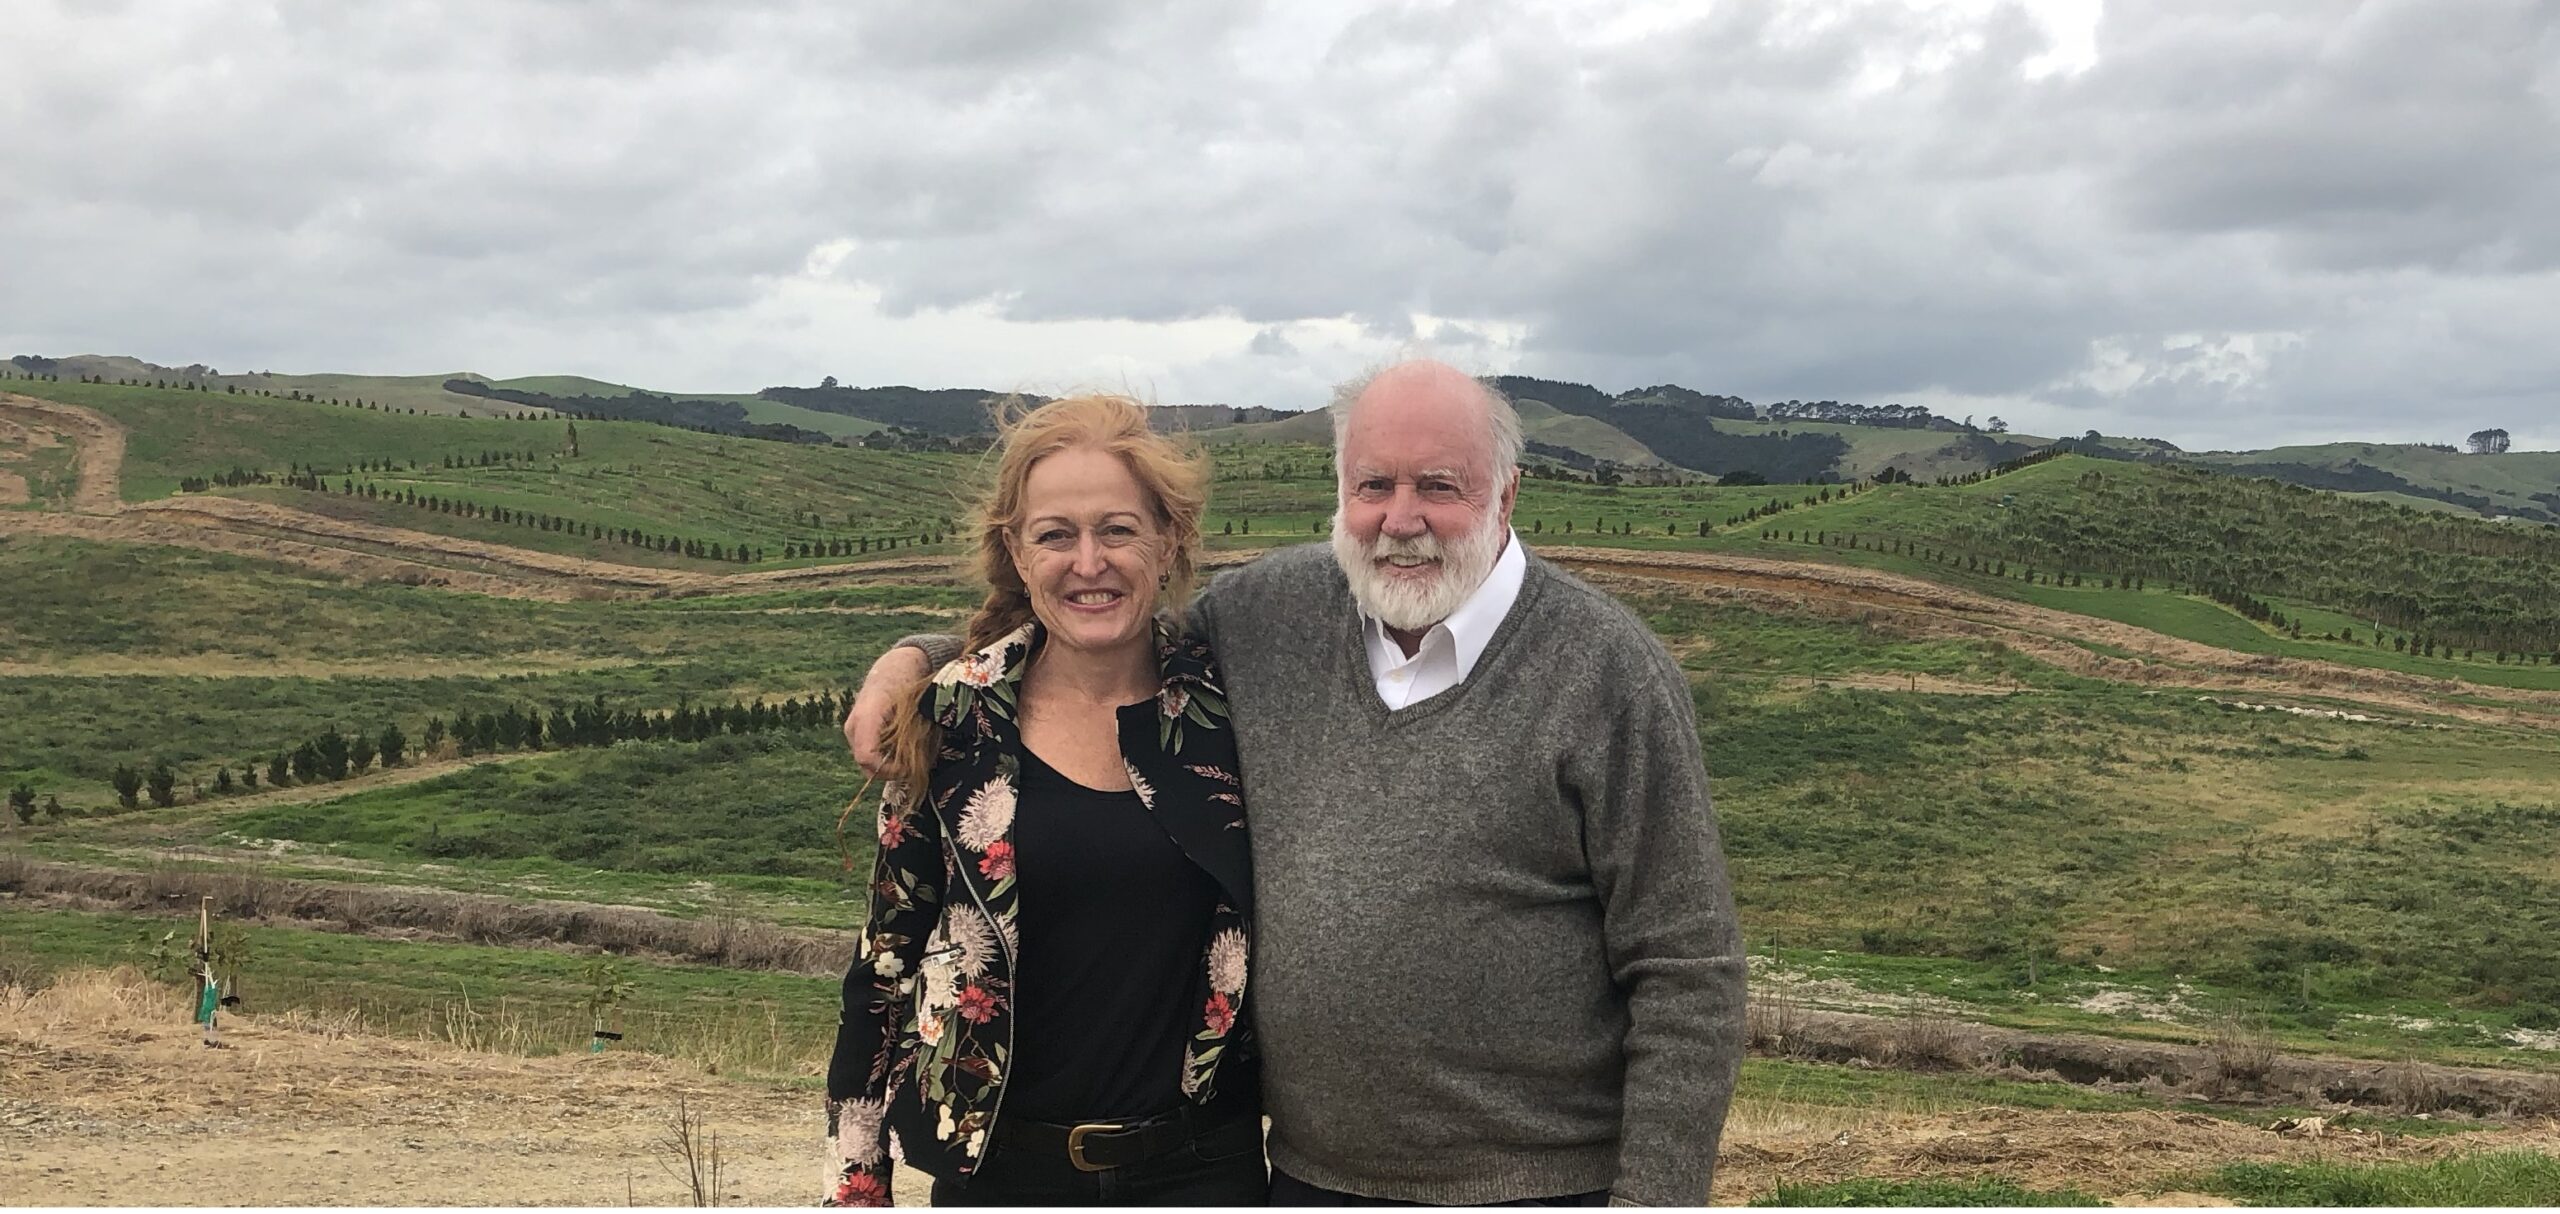 NZ Avocado CEO Jen Scoular and avocado grower Tony Gibbs on the site of a new 125 hectare avocado orchard in Tapora, Northland